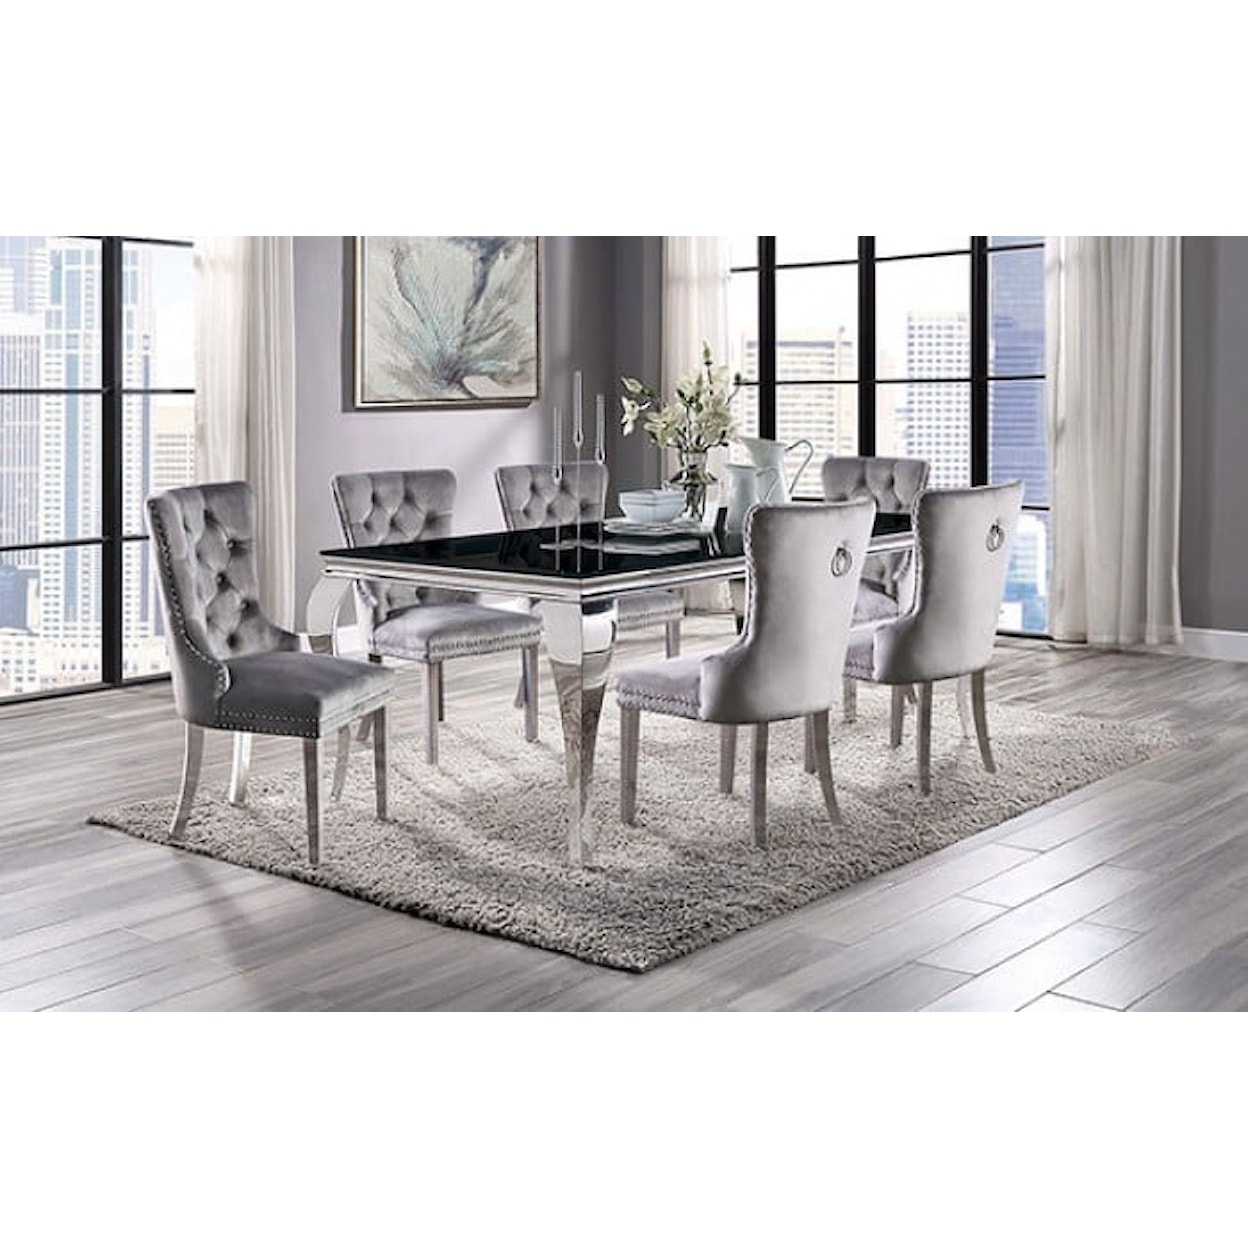 Furniture of America Neuveville 7-Piece Dining Set with Gray Chairs